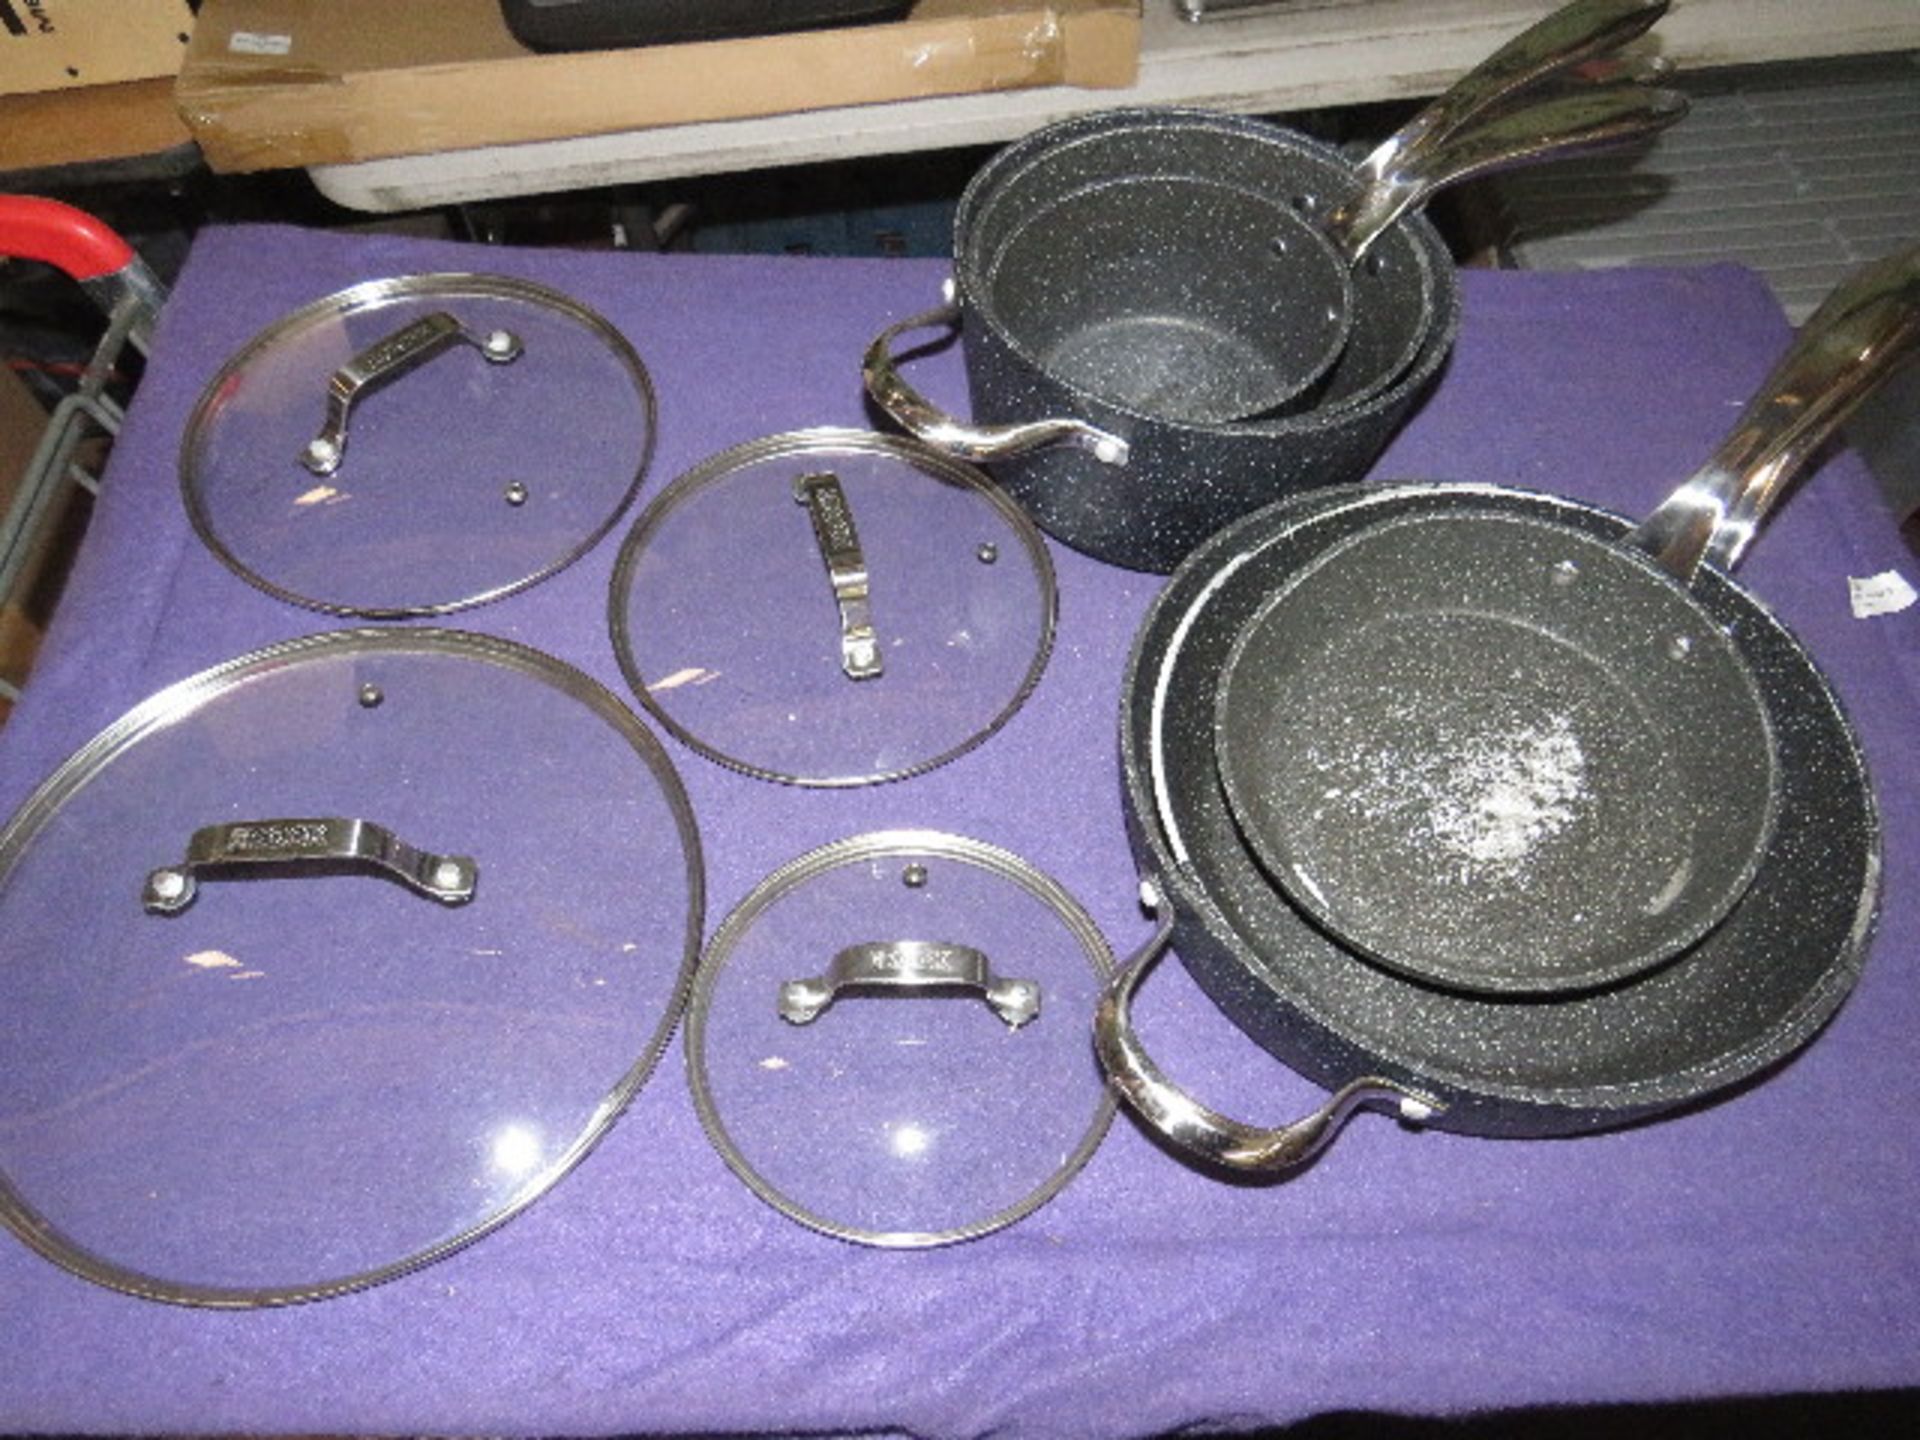 Starfrit The Rock - 10-Piece Cookware Set - Used Condition, Still Very Usable Condition.